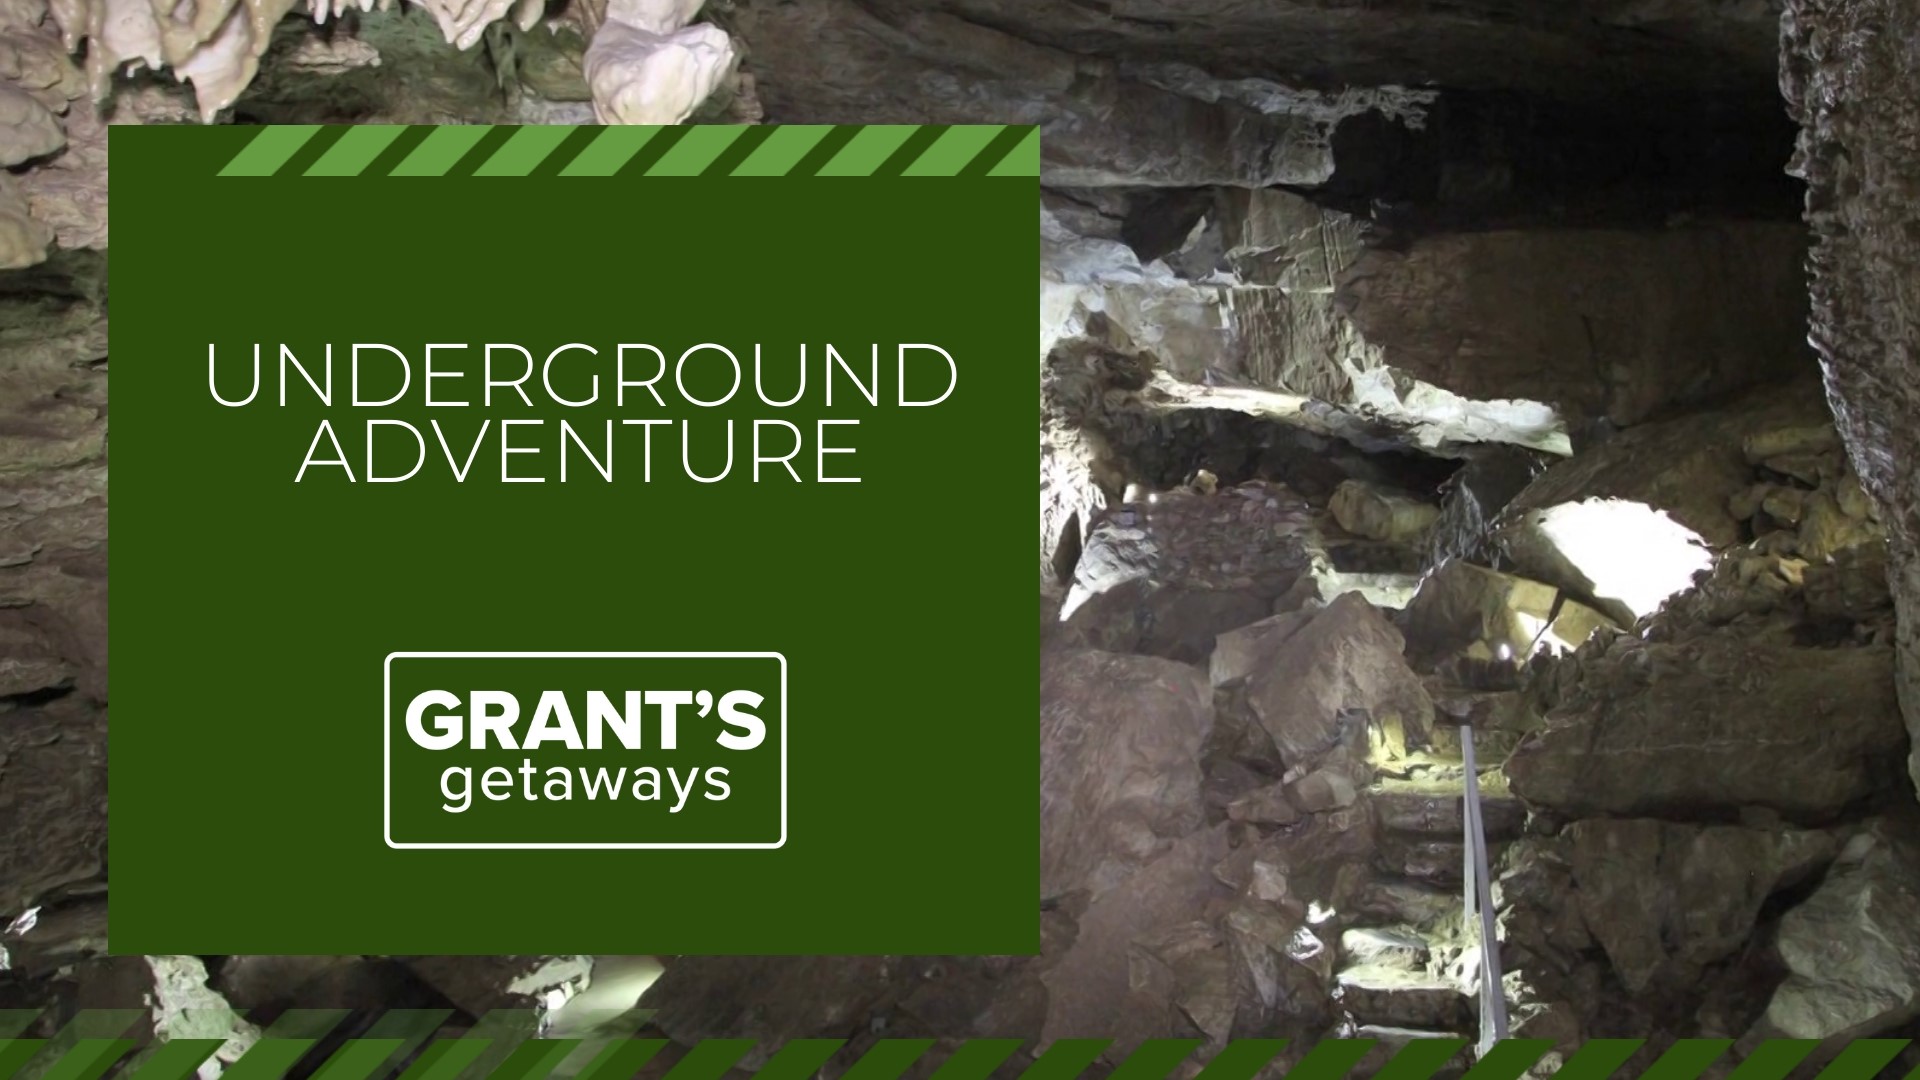 Grant McOmie takes us on an underground adventure to visit a national park with history you can touch.